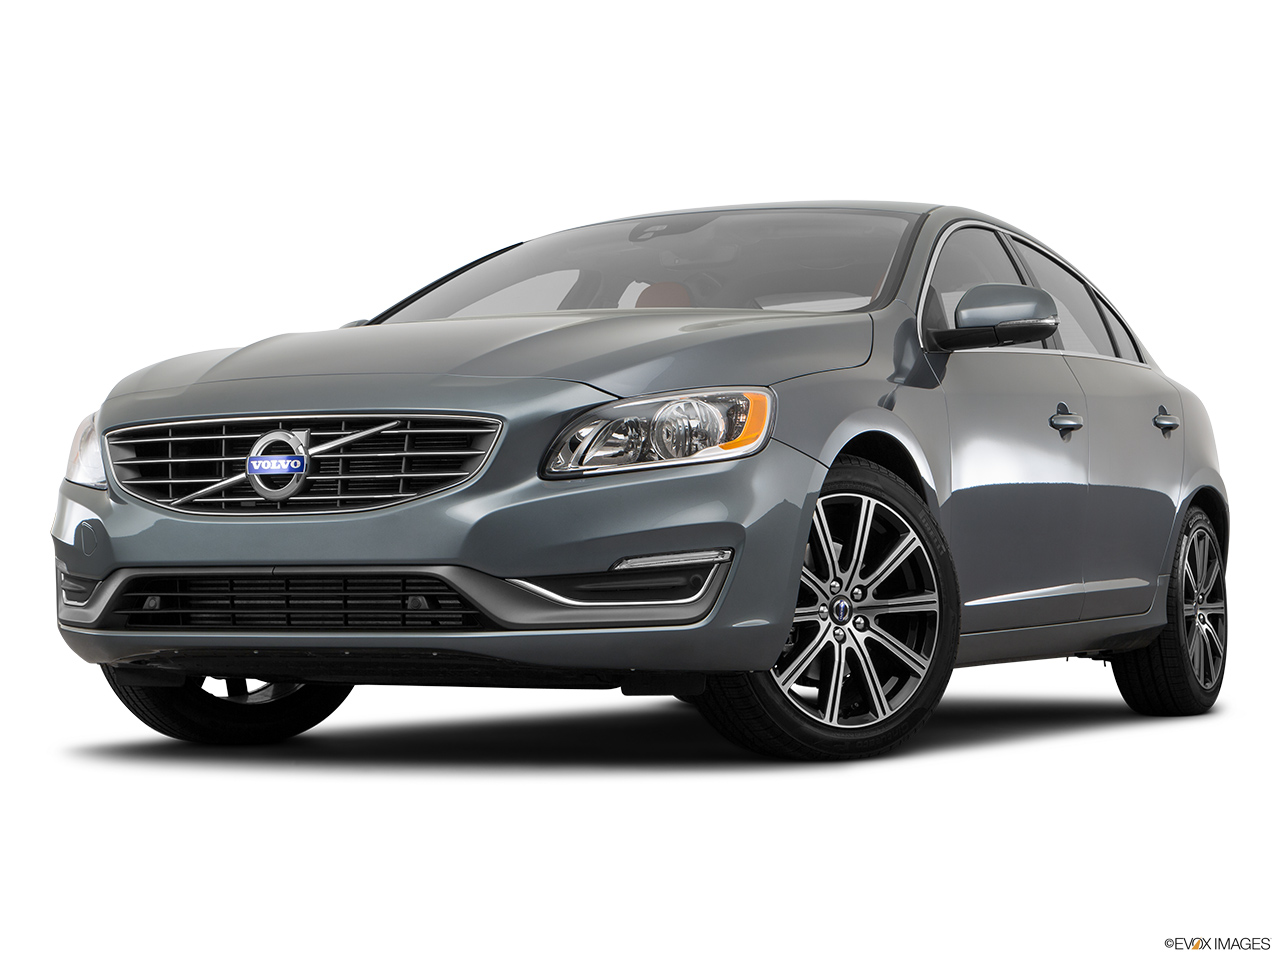 2017 Volvo S60 T5 Inscription Front angle view, low wide perspective. 